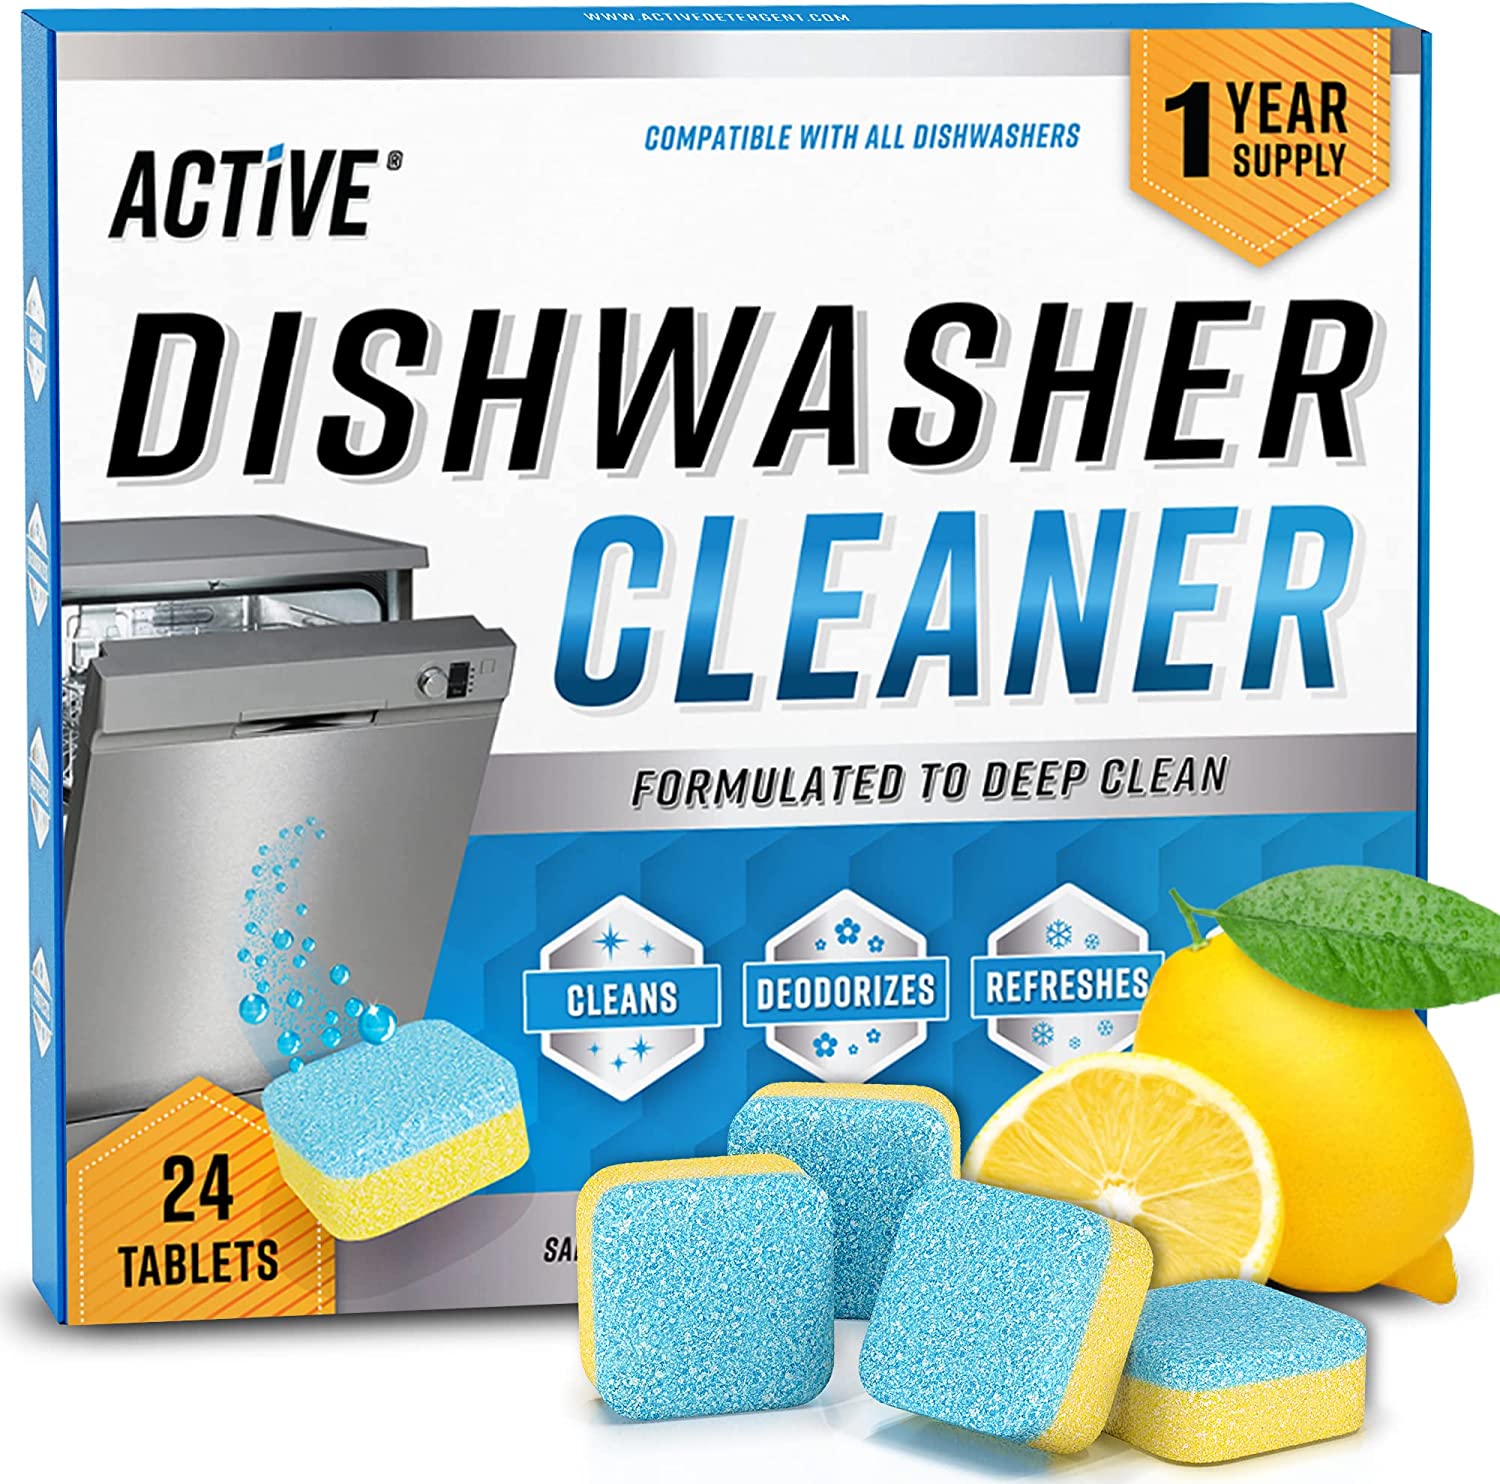 Uproot Cleaner Pro active dishwasher cleaner tablets